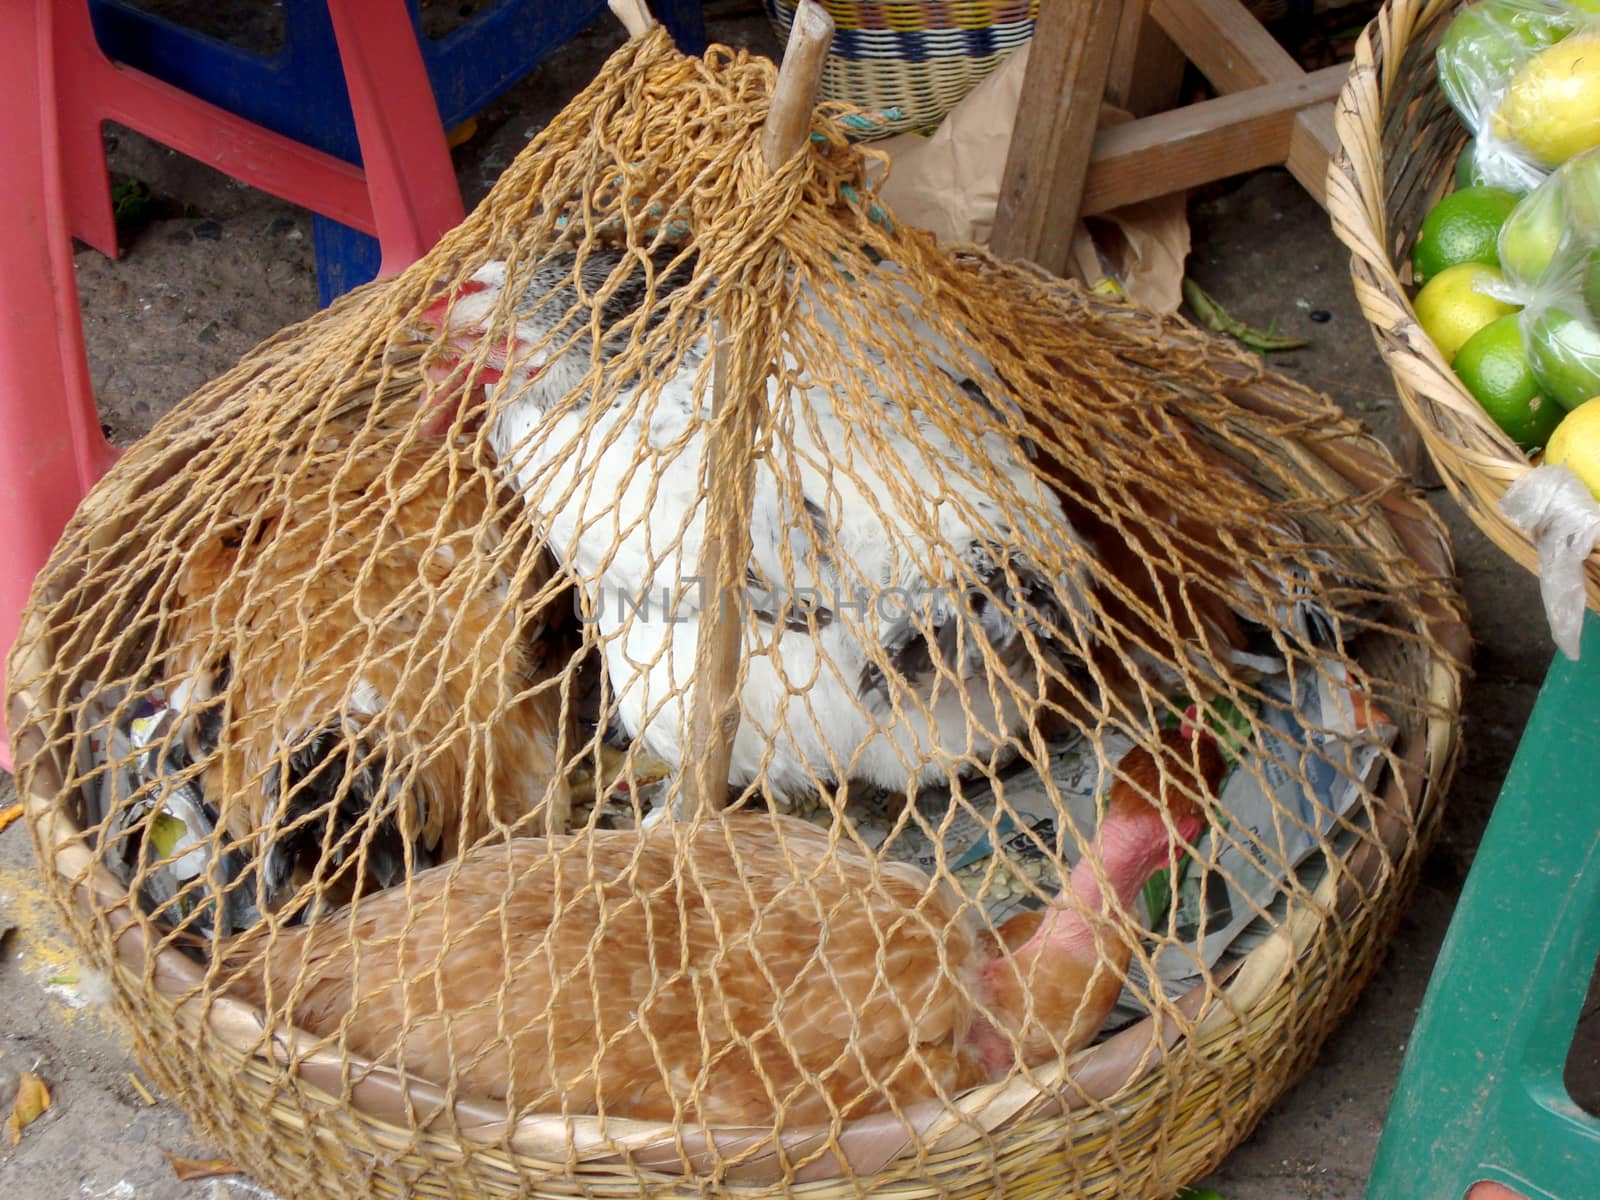 chickens in a basket for sale in a street market